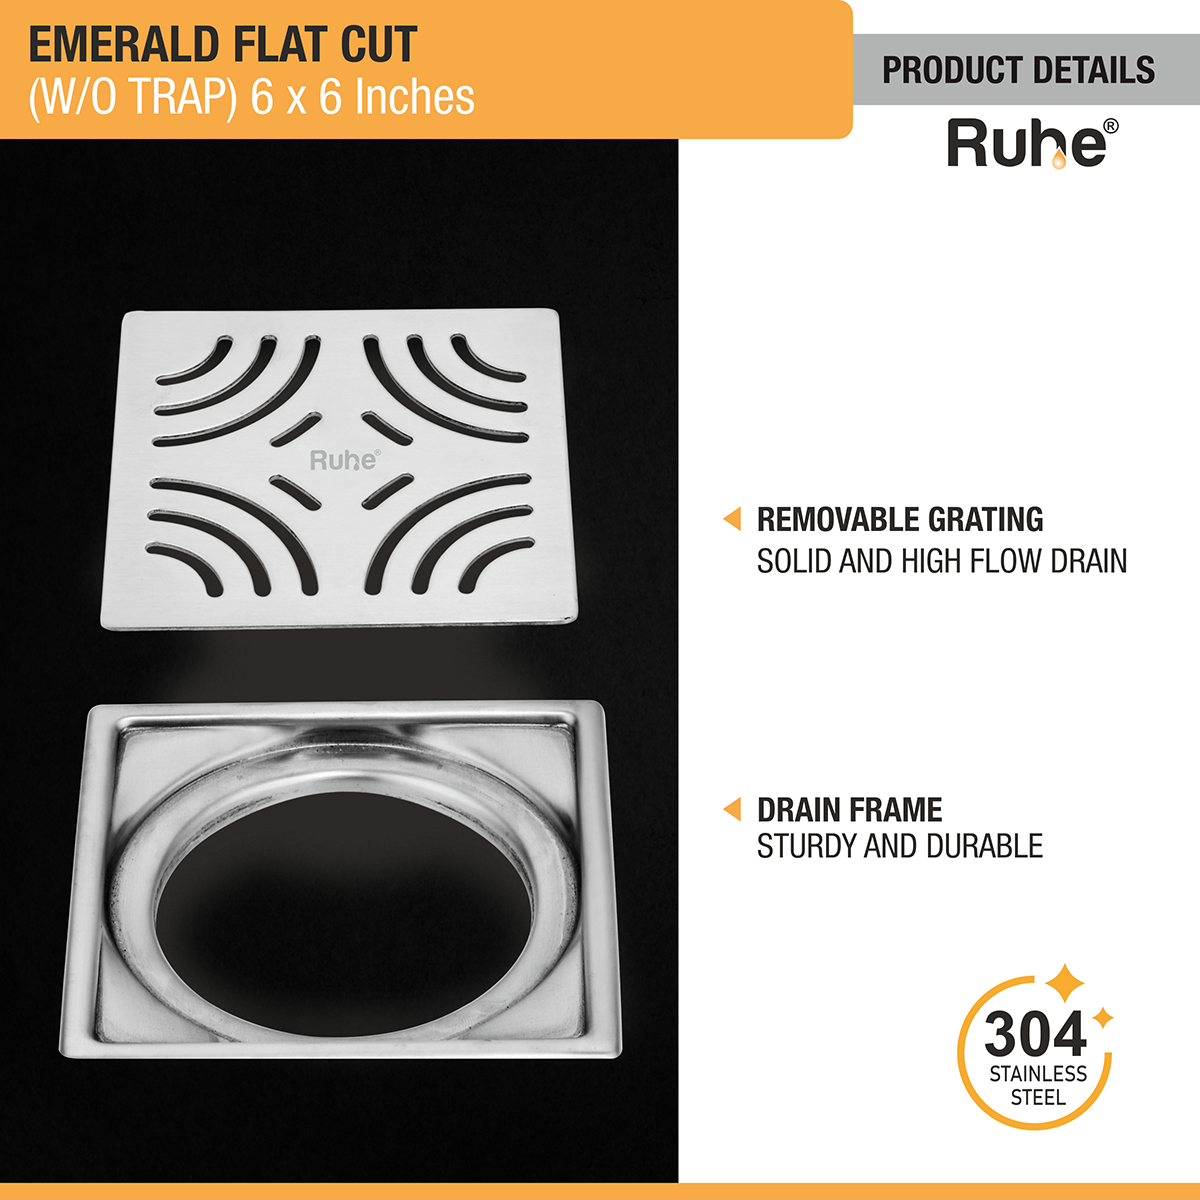 Emerald Square Flat Cut 304-Grade Floor Drain (6 x 6 Inches) with removable grating and drain frame